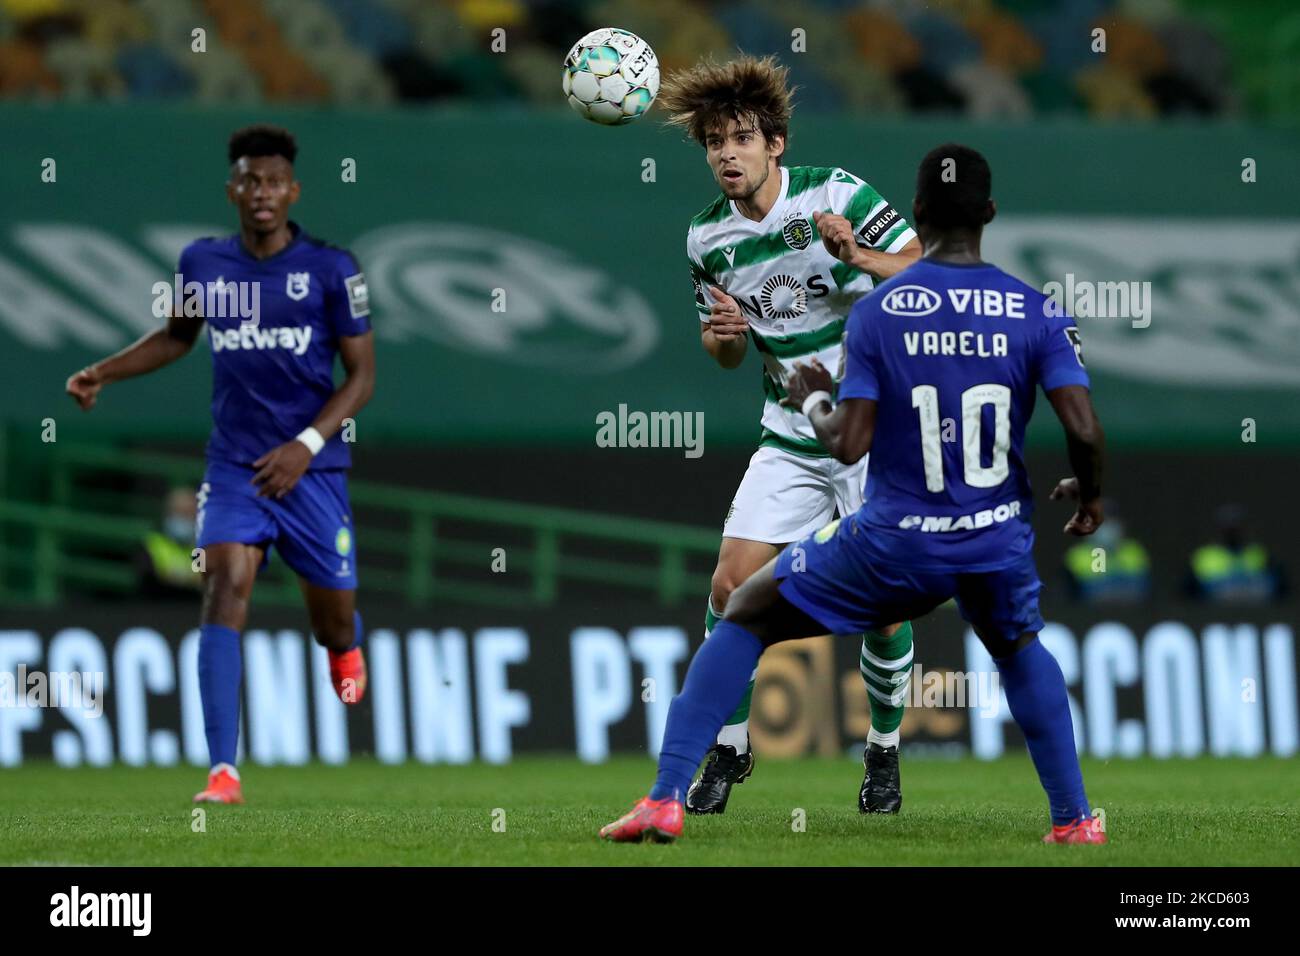 Daniel Braganca of Sporting CP (C ) vies with Silvestre Varela of Belenenses SAD during the Portuguese League football match between Sporting CP and Belenenses SAD at Jose Alvalade stadium in Lisbon, Portugal on April 21, 2021. (Photo by Pedro FiÃºza/NurPhoto) Stock Photo